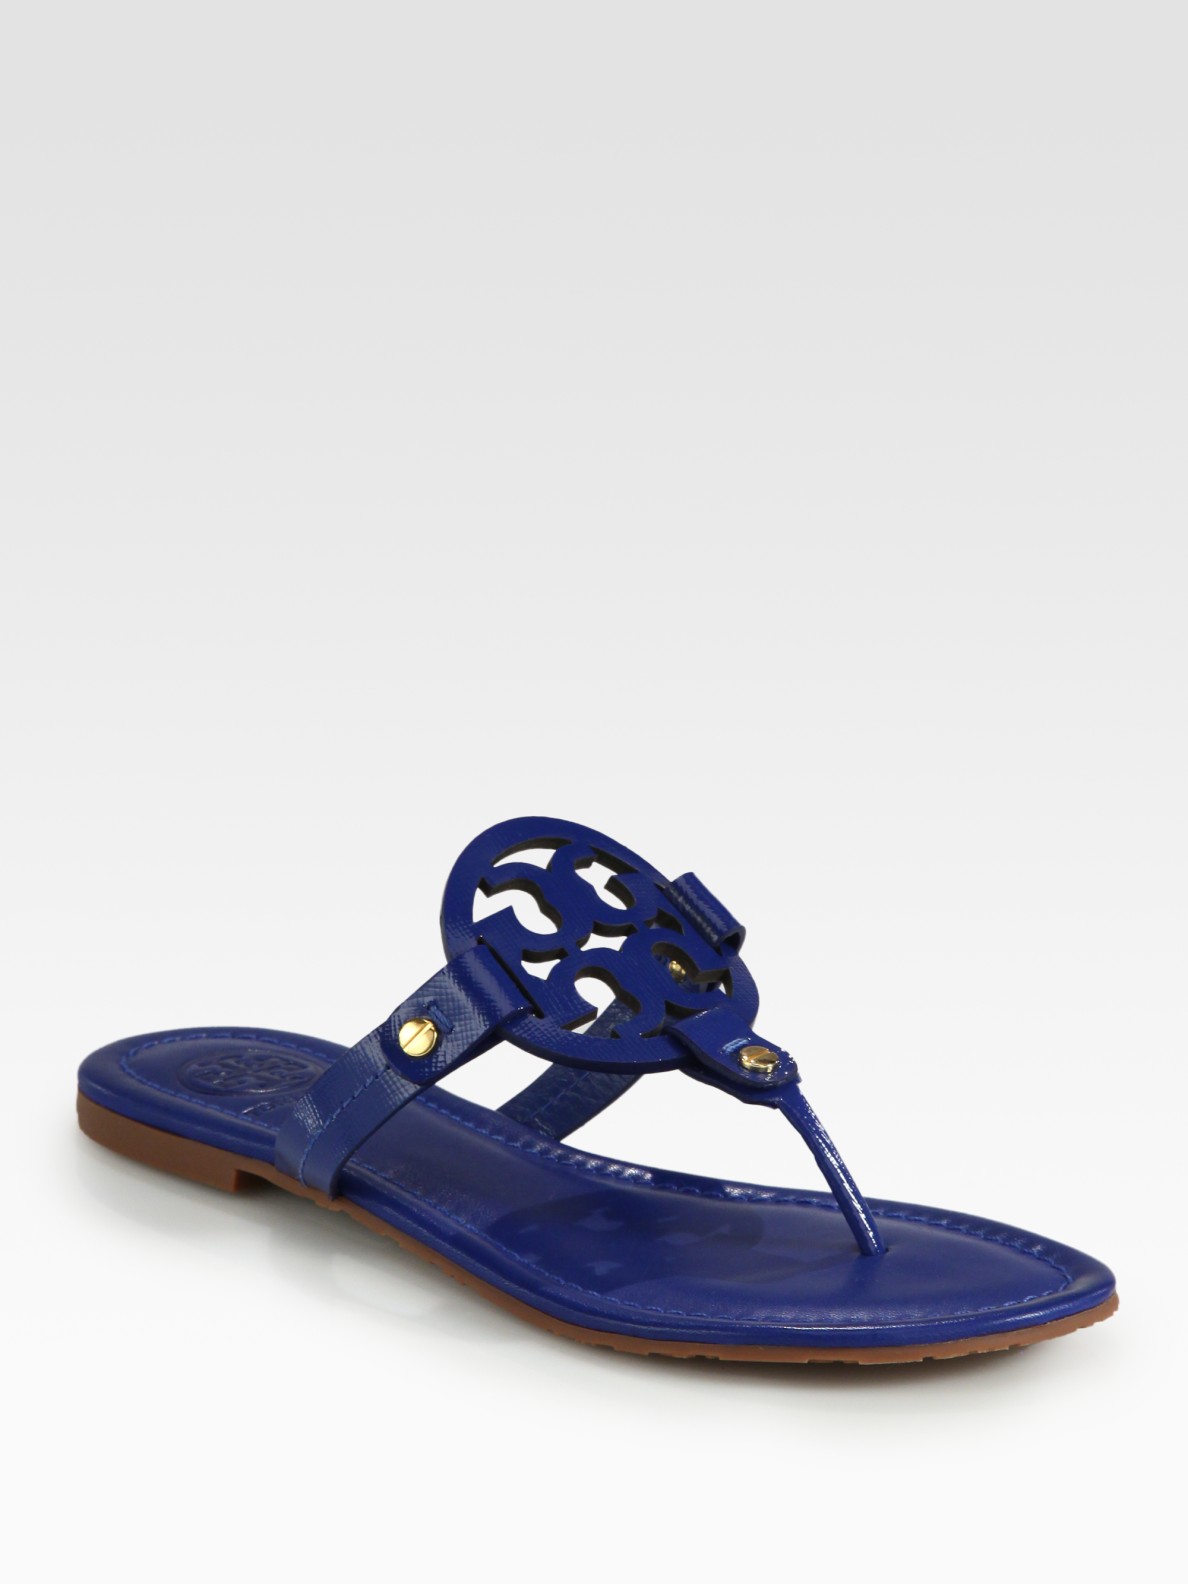 Tory Burch Miller Patent Leather Thong Sandals in (ocean) | Lyst